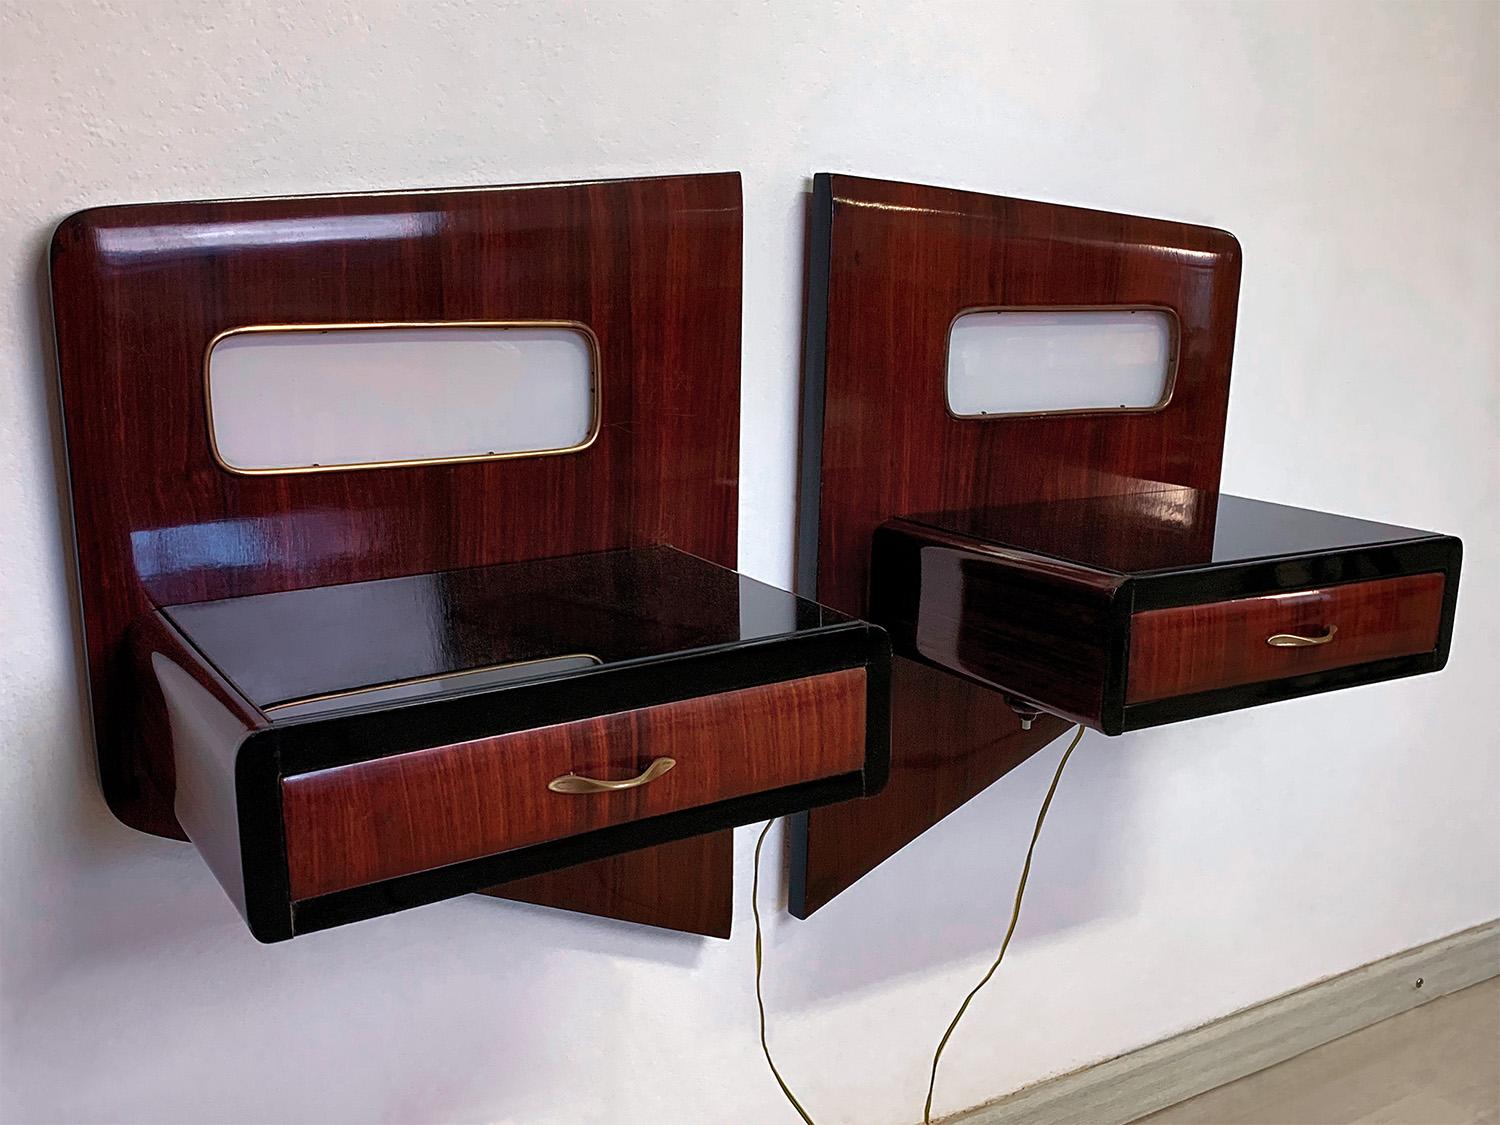 Pair of stylish Italian suspended Nightstands in mahogany wood, designed and manufactured by Vittorio Dassi in the 1950s.
Each nightstand has a drawer surmounted by a black glass top and is equipped with perfectly functioning light, under which the